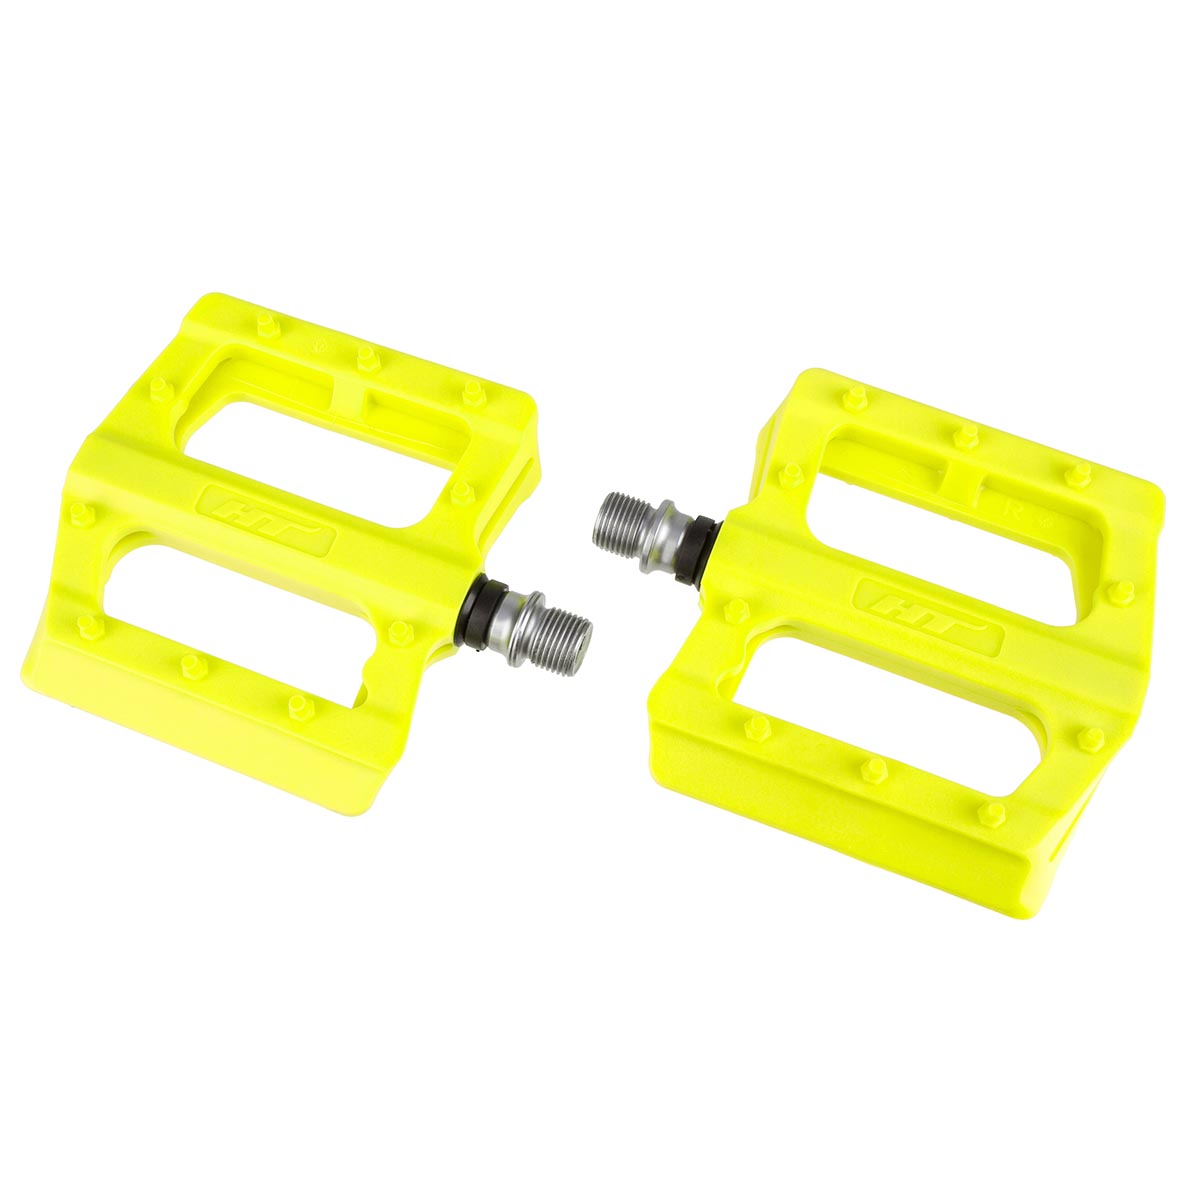 HT Components Pedale PA12 Giallo Fluo